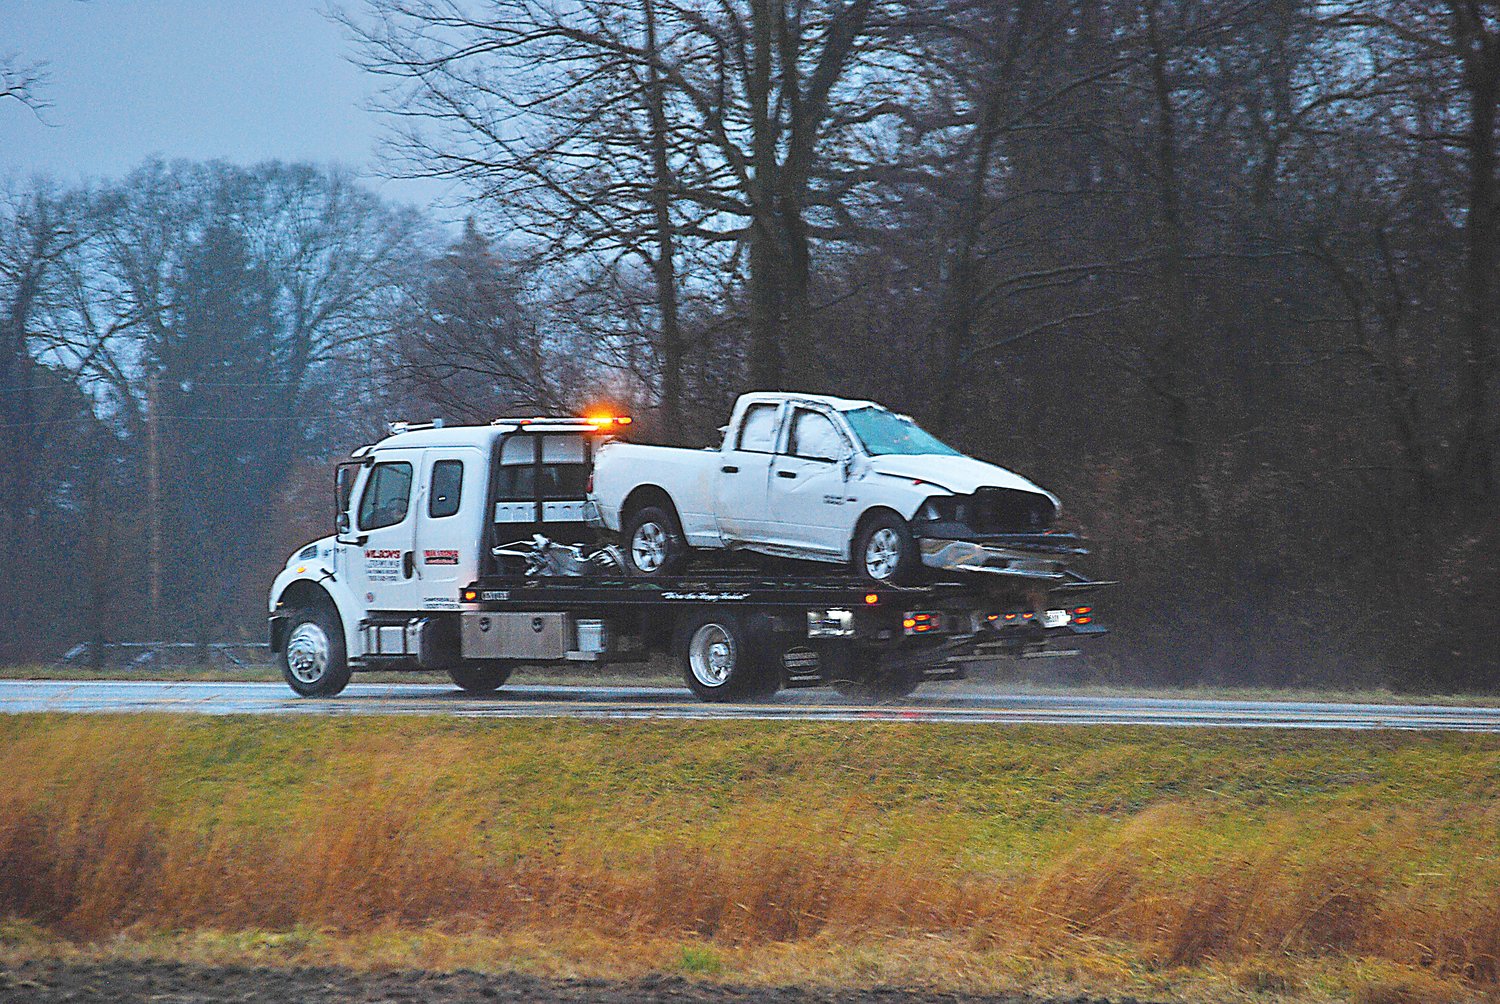 A 19-year-old Muncie man was transported to Franciscan Health Crawfordsville with non-life threatening injuries Monday following a two-vehicle crash on S.R. 32E.